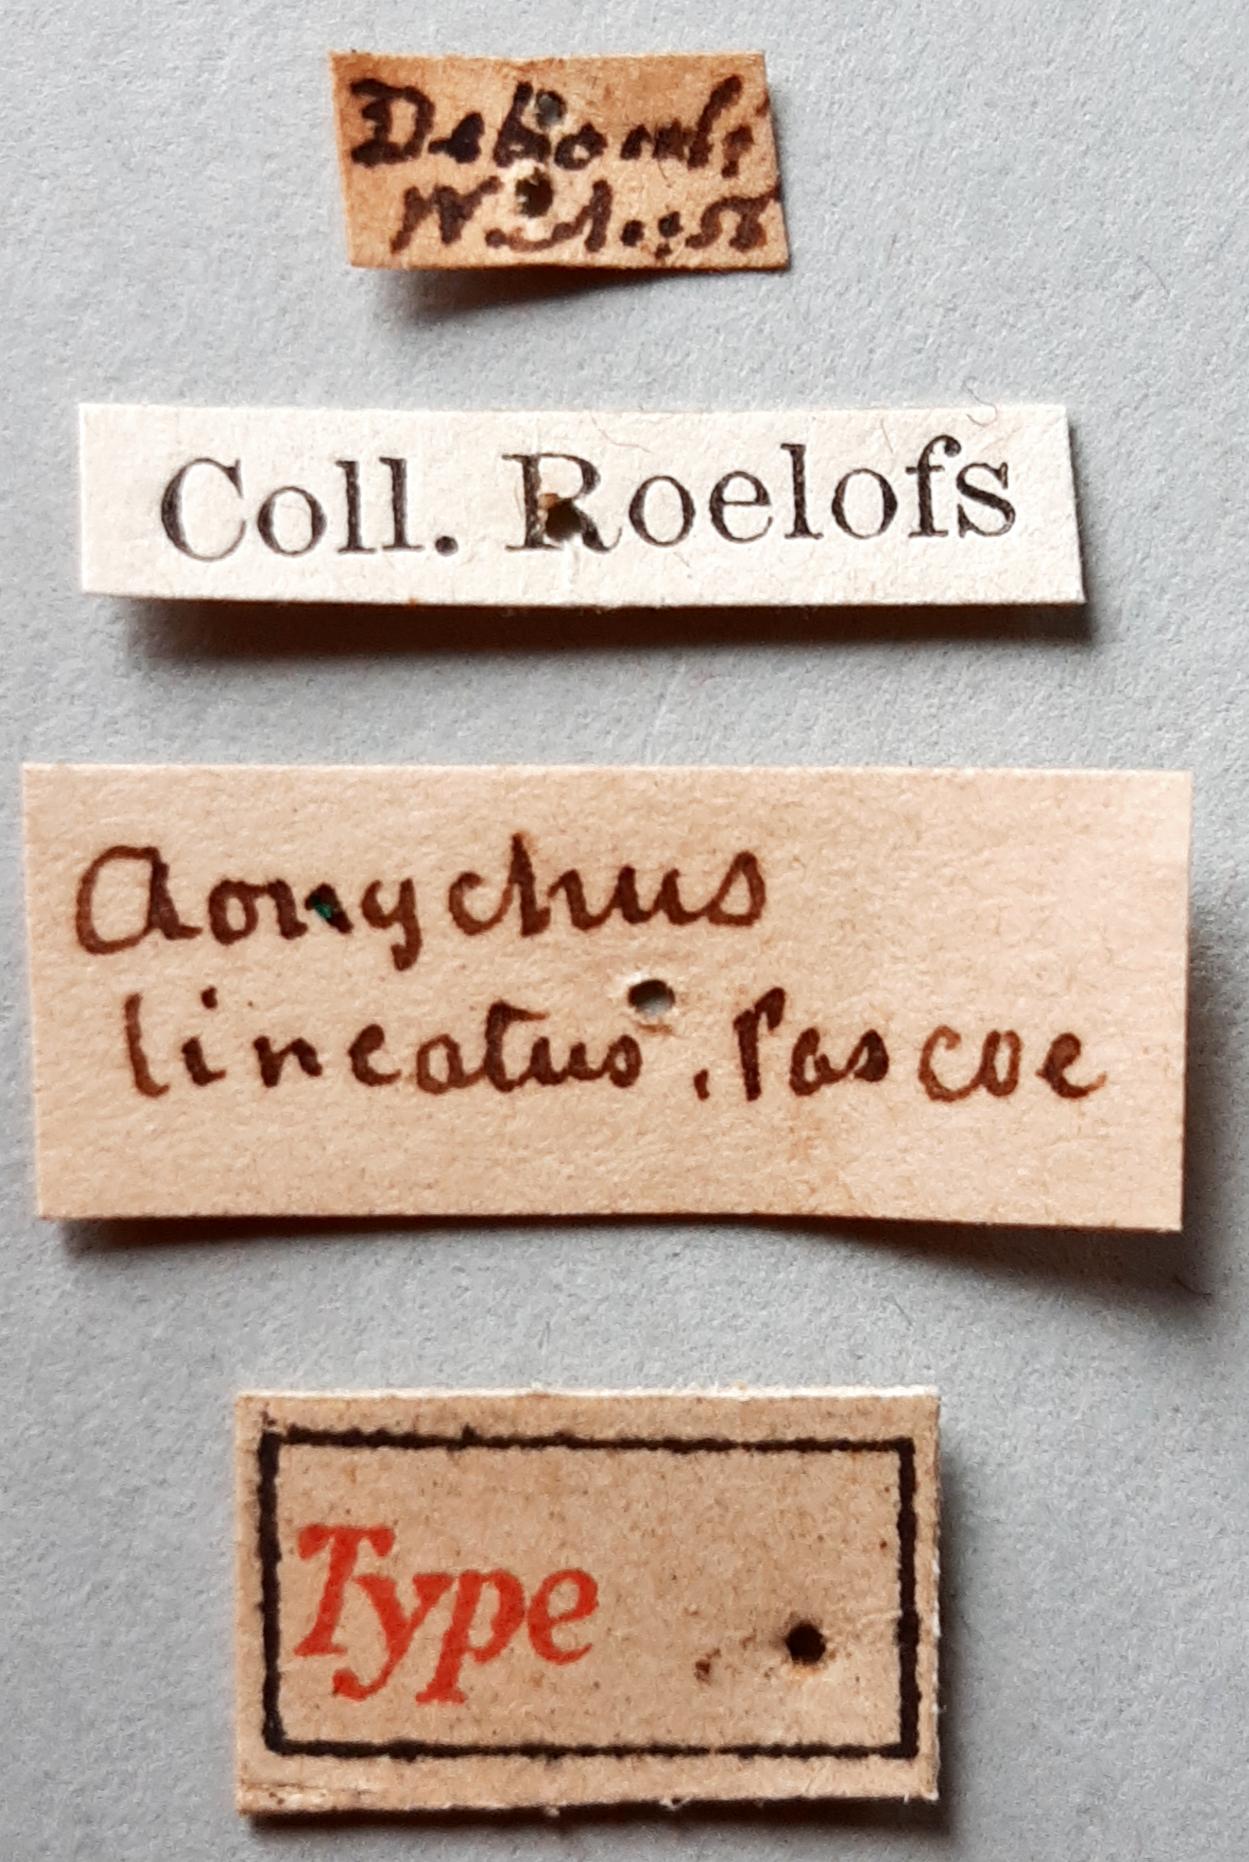 Aonychus lineatus Ht labels